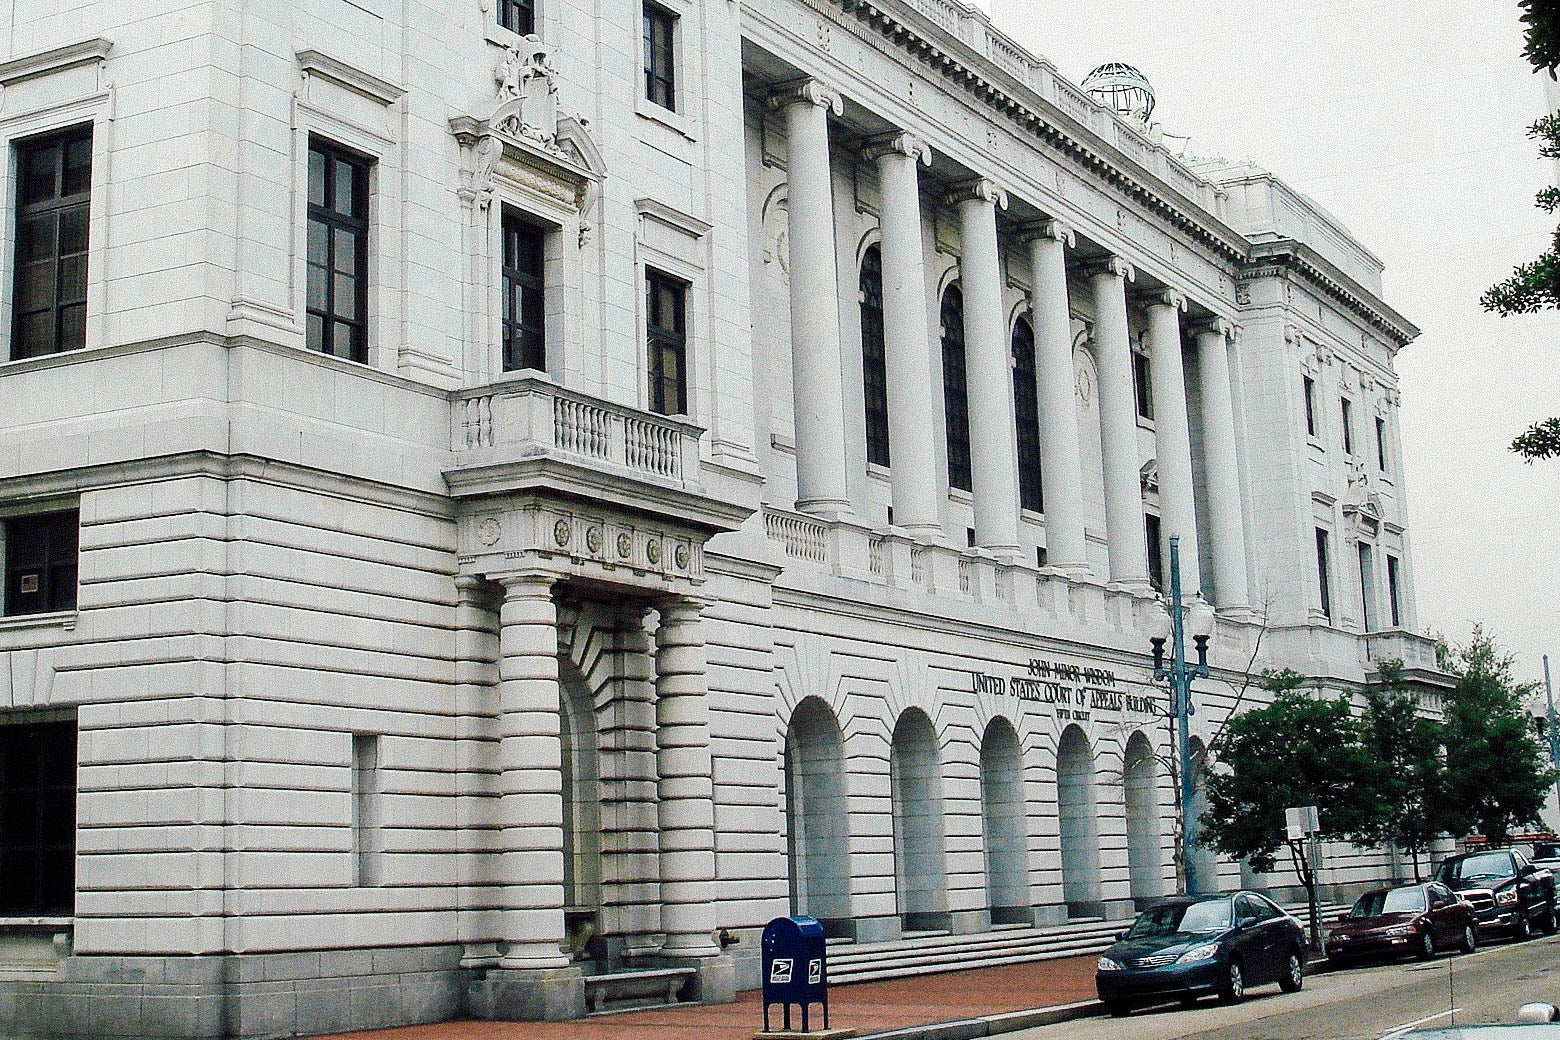 The outside of a gray courthouse building with tall columns.